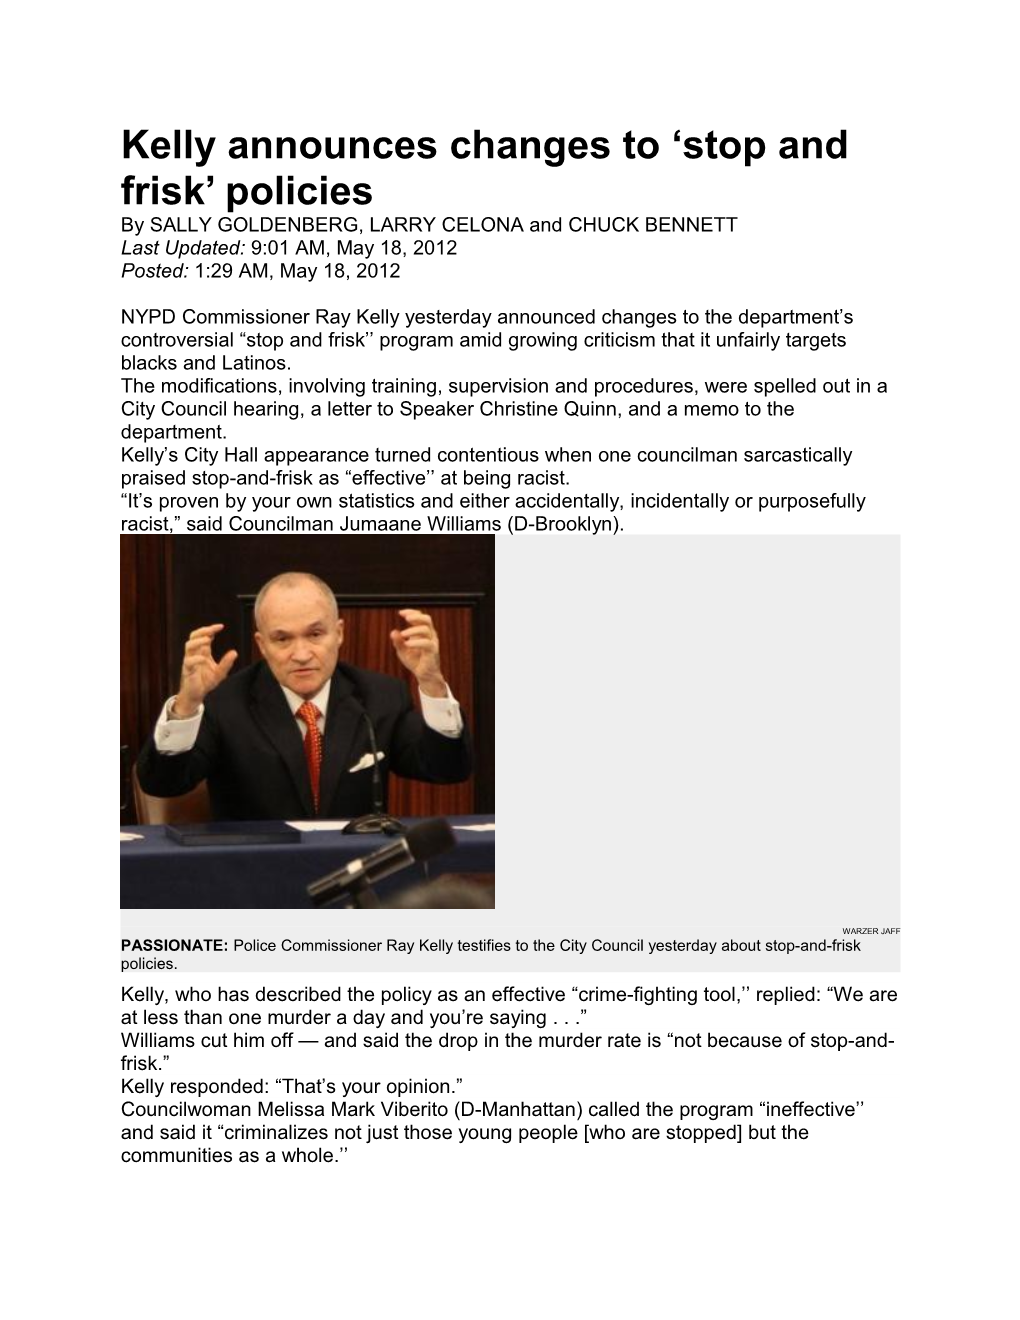 Kelly Announces Changes to Stop and Frisk Policies